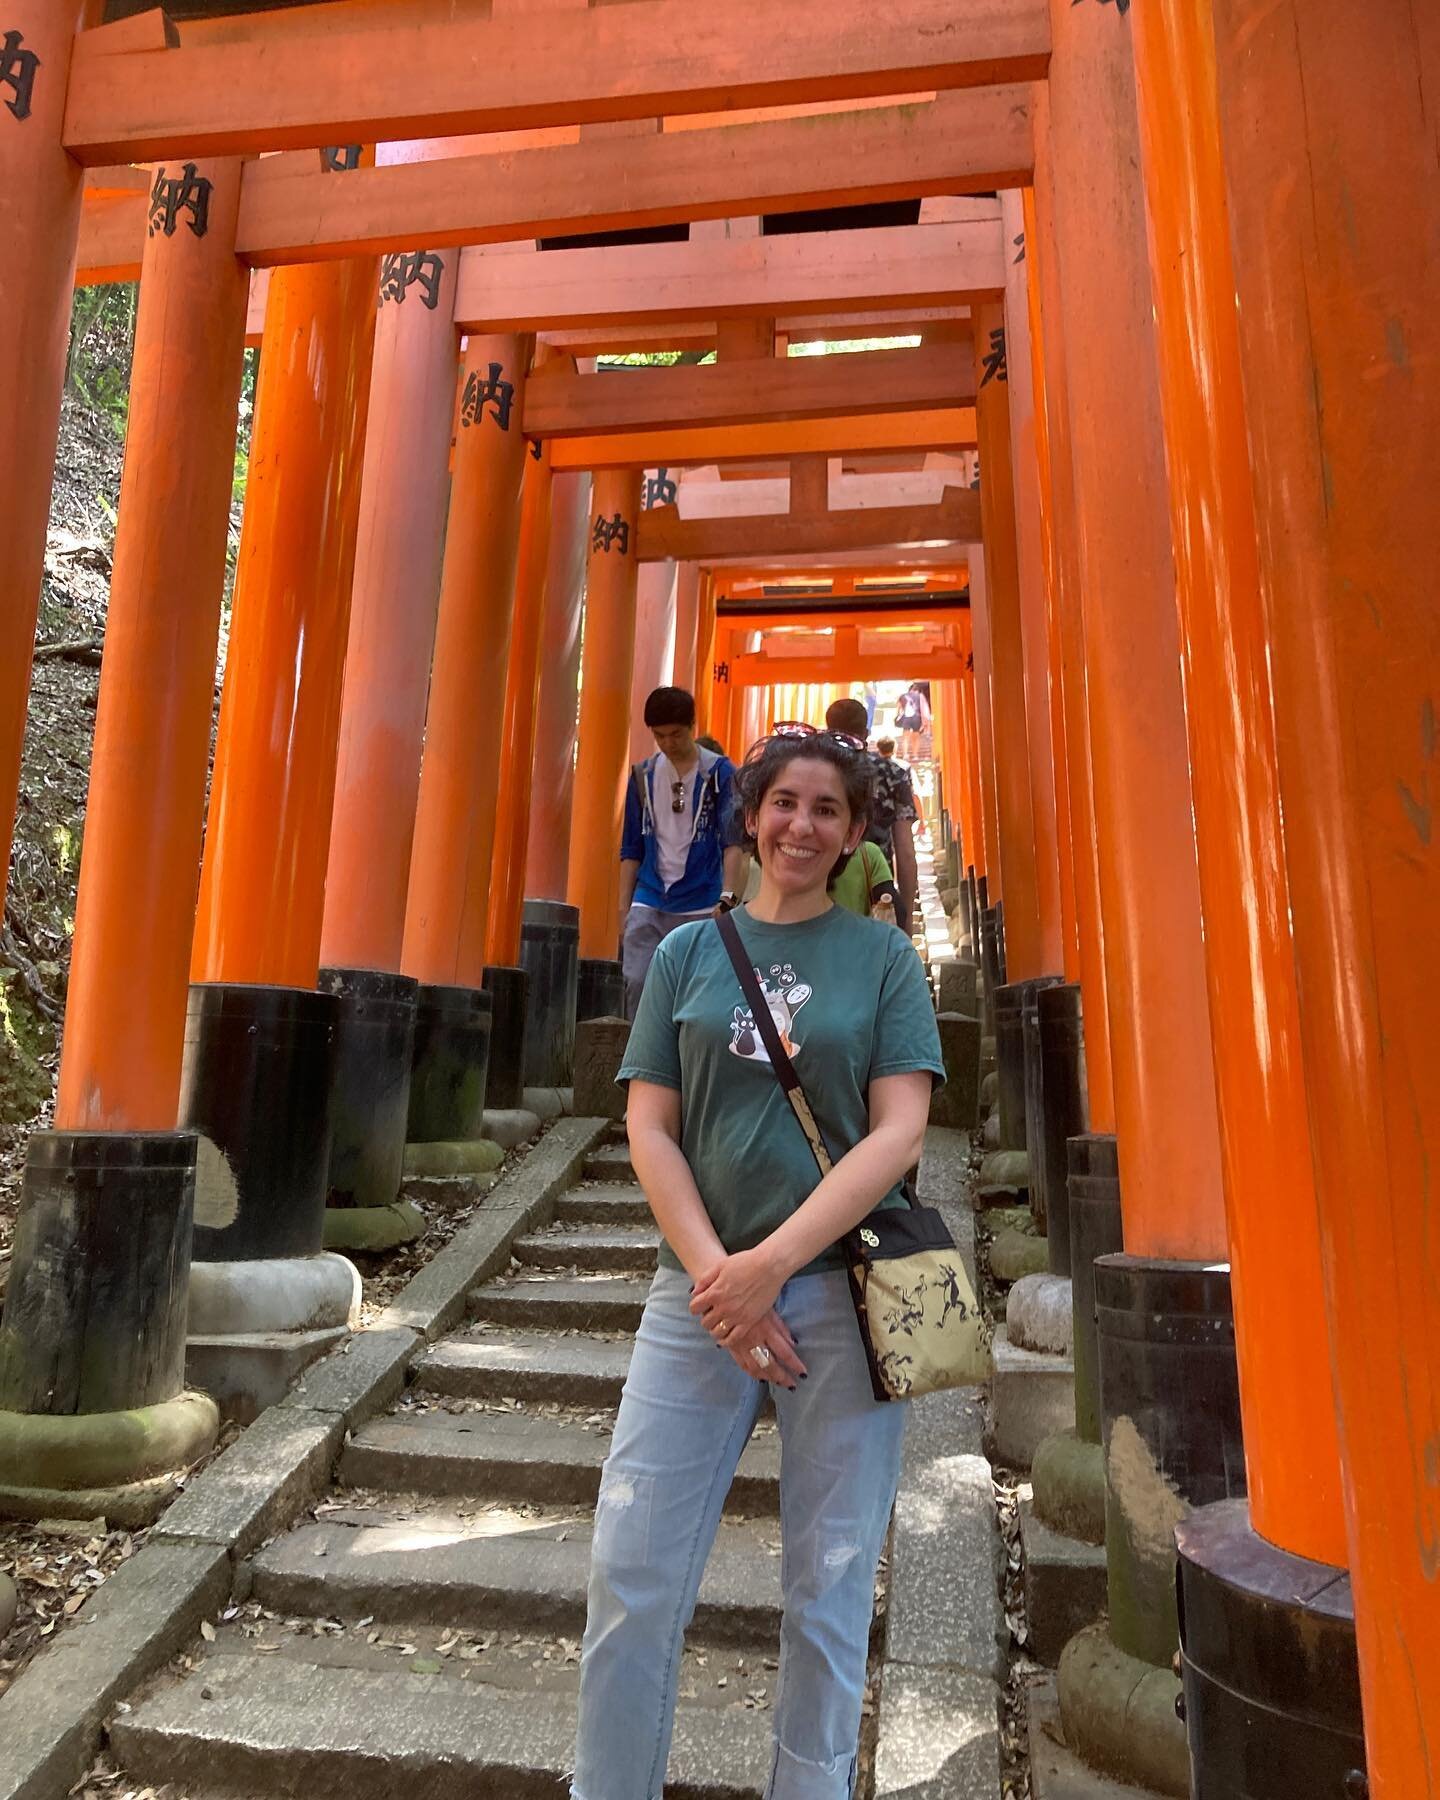 [Japan Tour] It was a hot day. We visited Fushimi Inari shrine, Tofukuji temple and Gion. We watched amazing process of candy making and had great meals. My memories are so rusty. It&rsquo;s been very helpful to travel with tour members who are exper